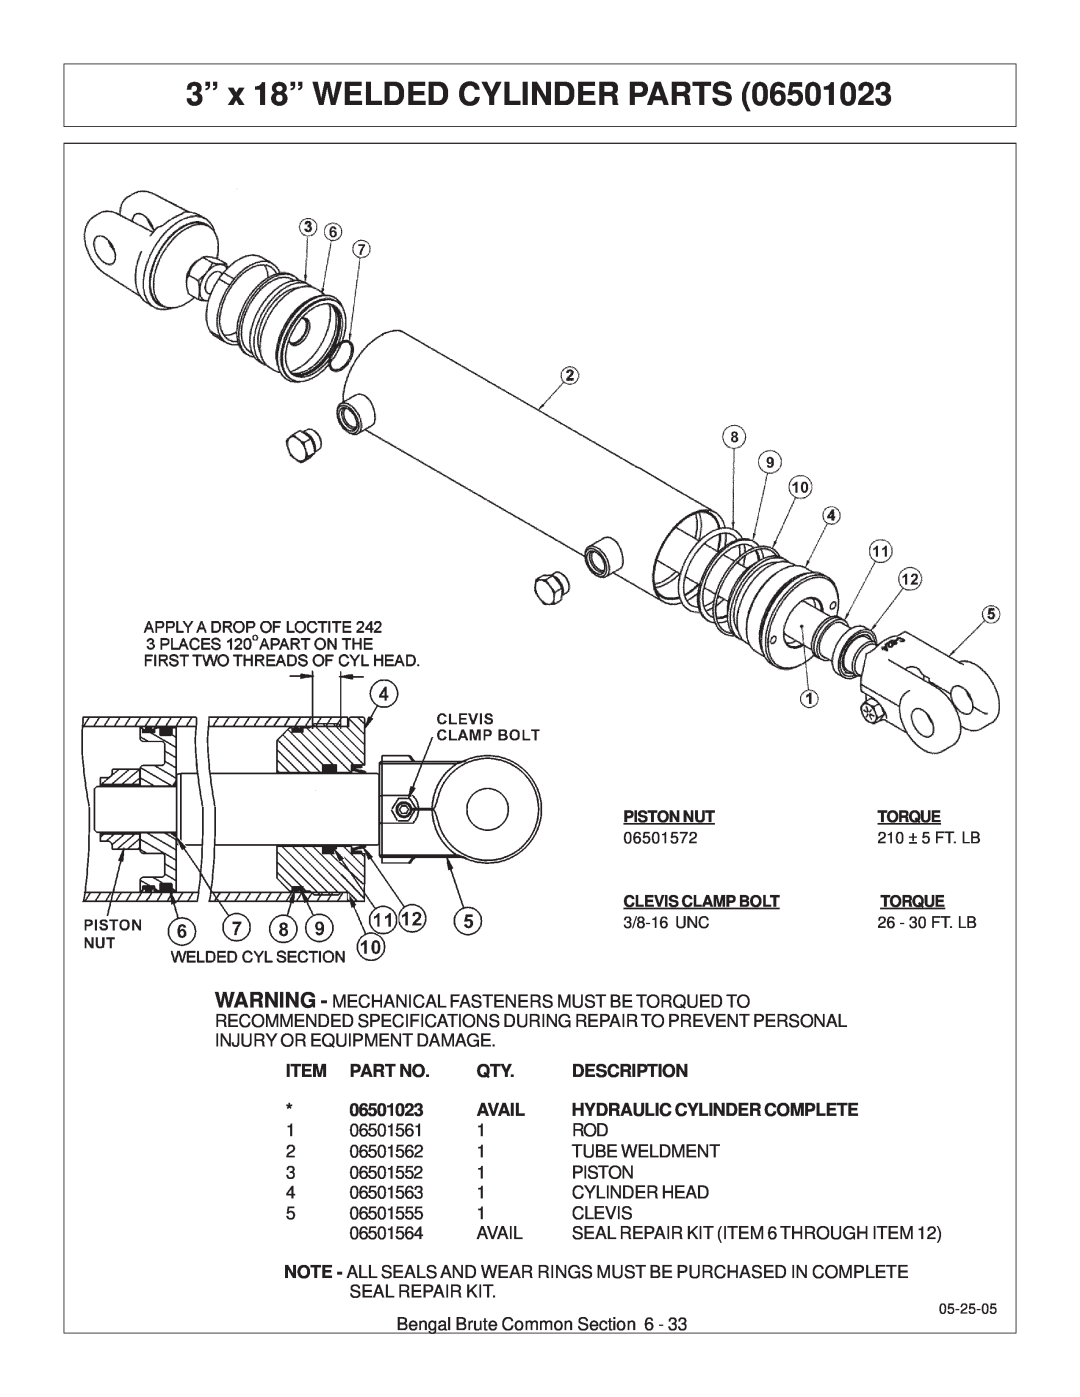 Tiger JD 62-6420 manual 3” x 18” WELDED CYLINDER PARTS, Description, 06501023, Avail, Hydraulic Cylinder Complete 